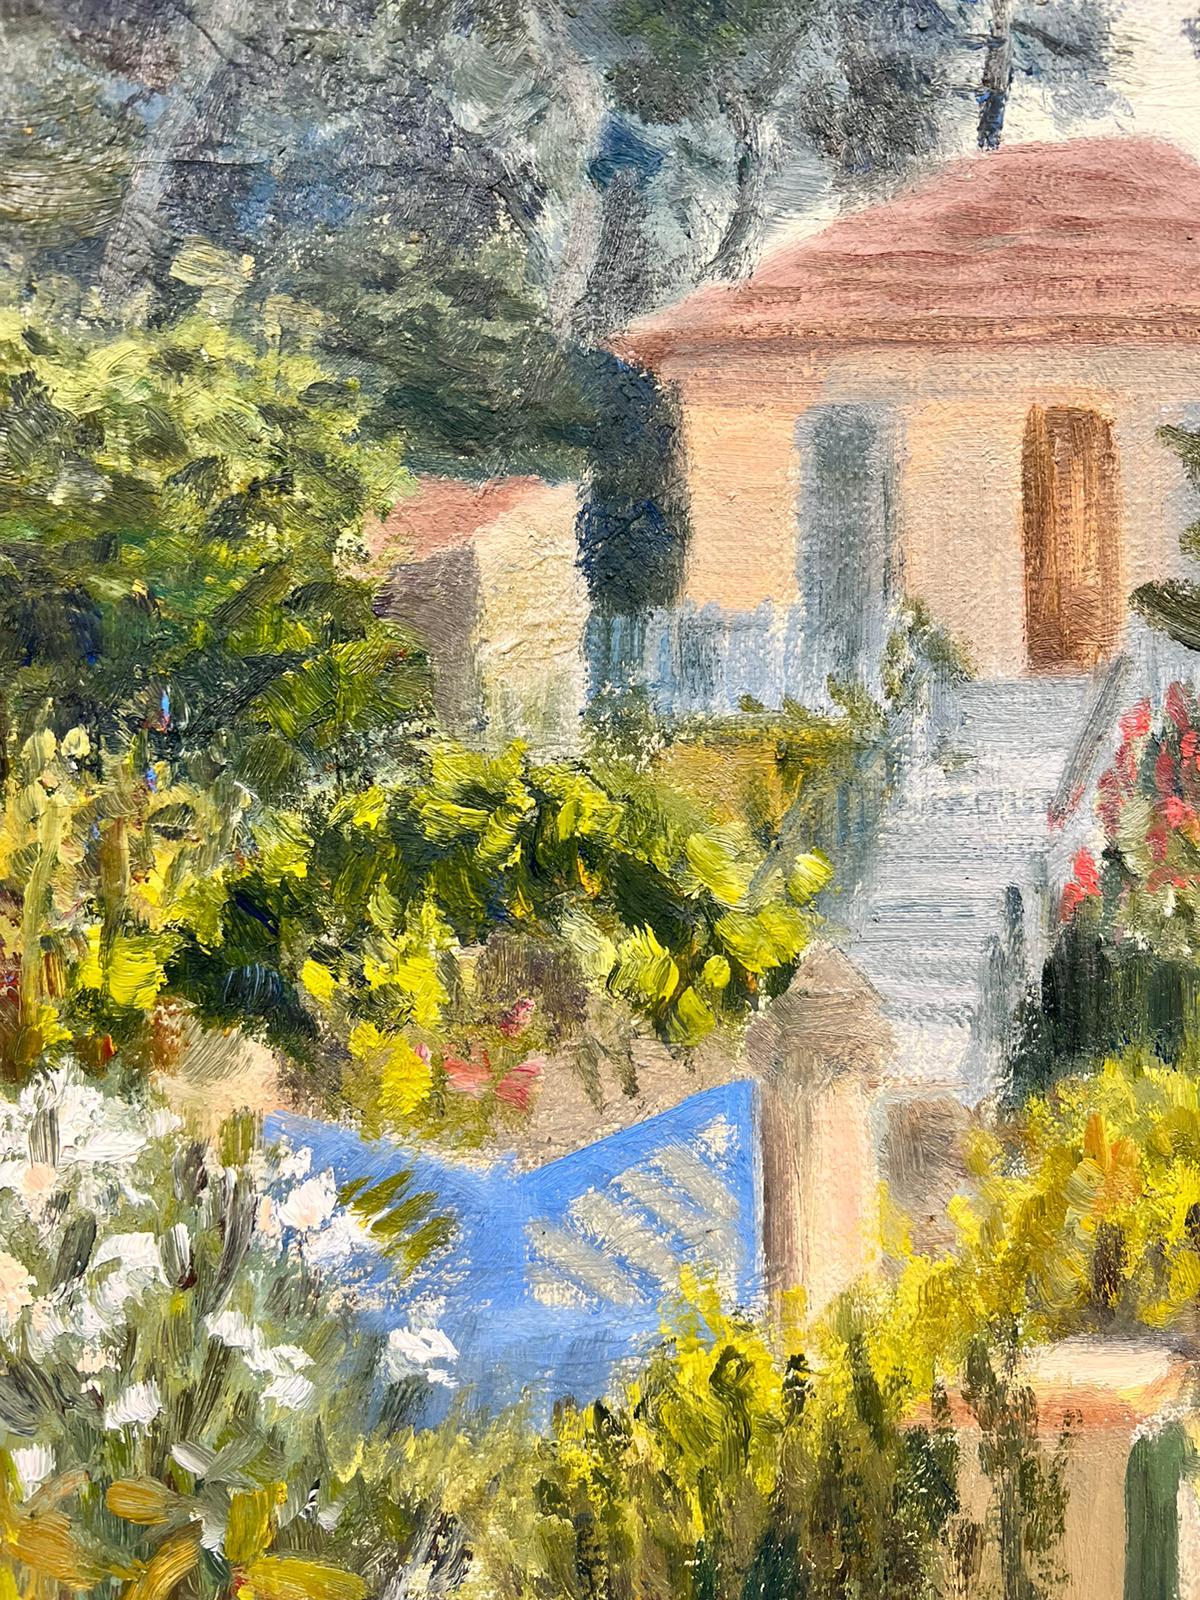 Garden Landscape
by Josine Vignon (French 1922-2022)
stamped verso
oil painting on canvas, unframed

canvas: 16 x 10.5 inches

Colors: Green colors, brown, blue, white and red

Very good condition

Provenance: from the artists estate, France

Josine